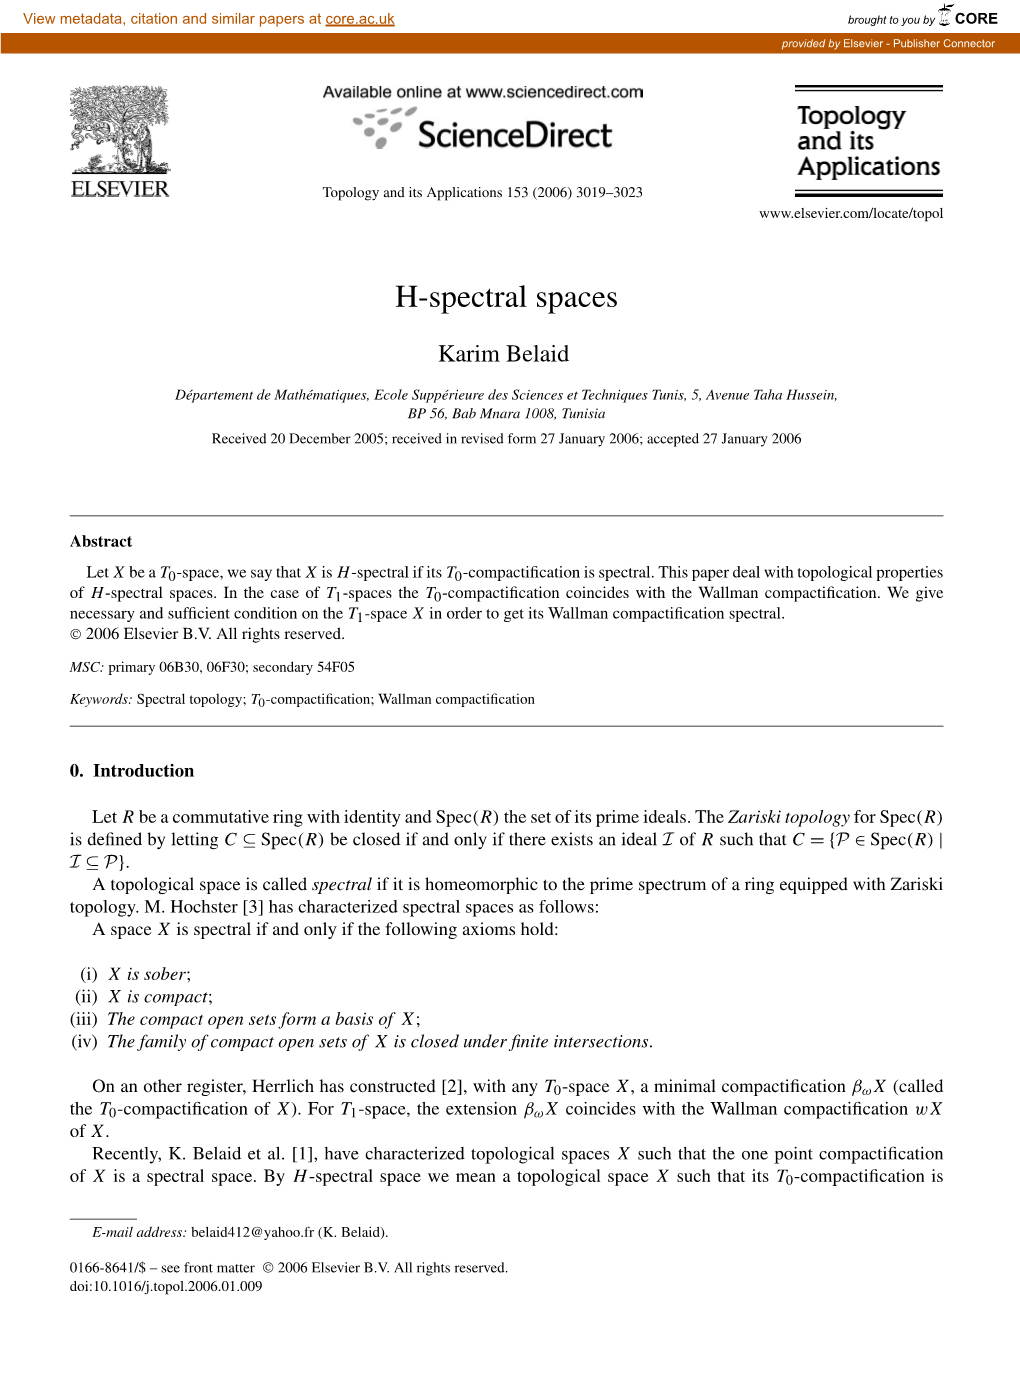 H-Spectral Spaces